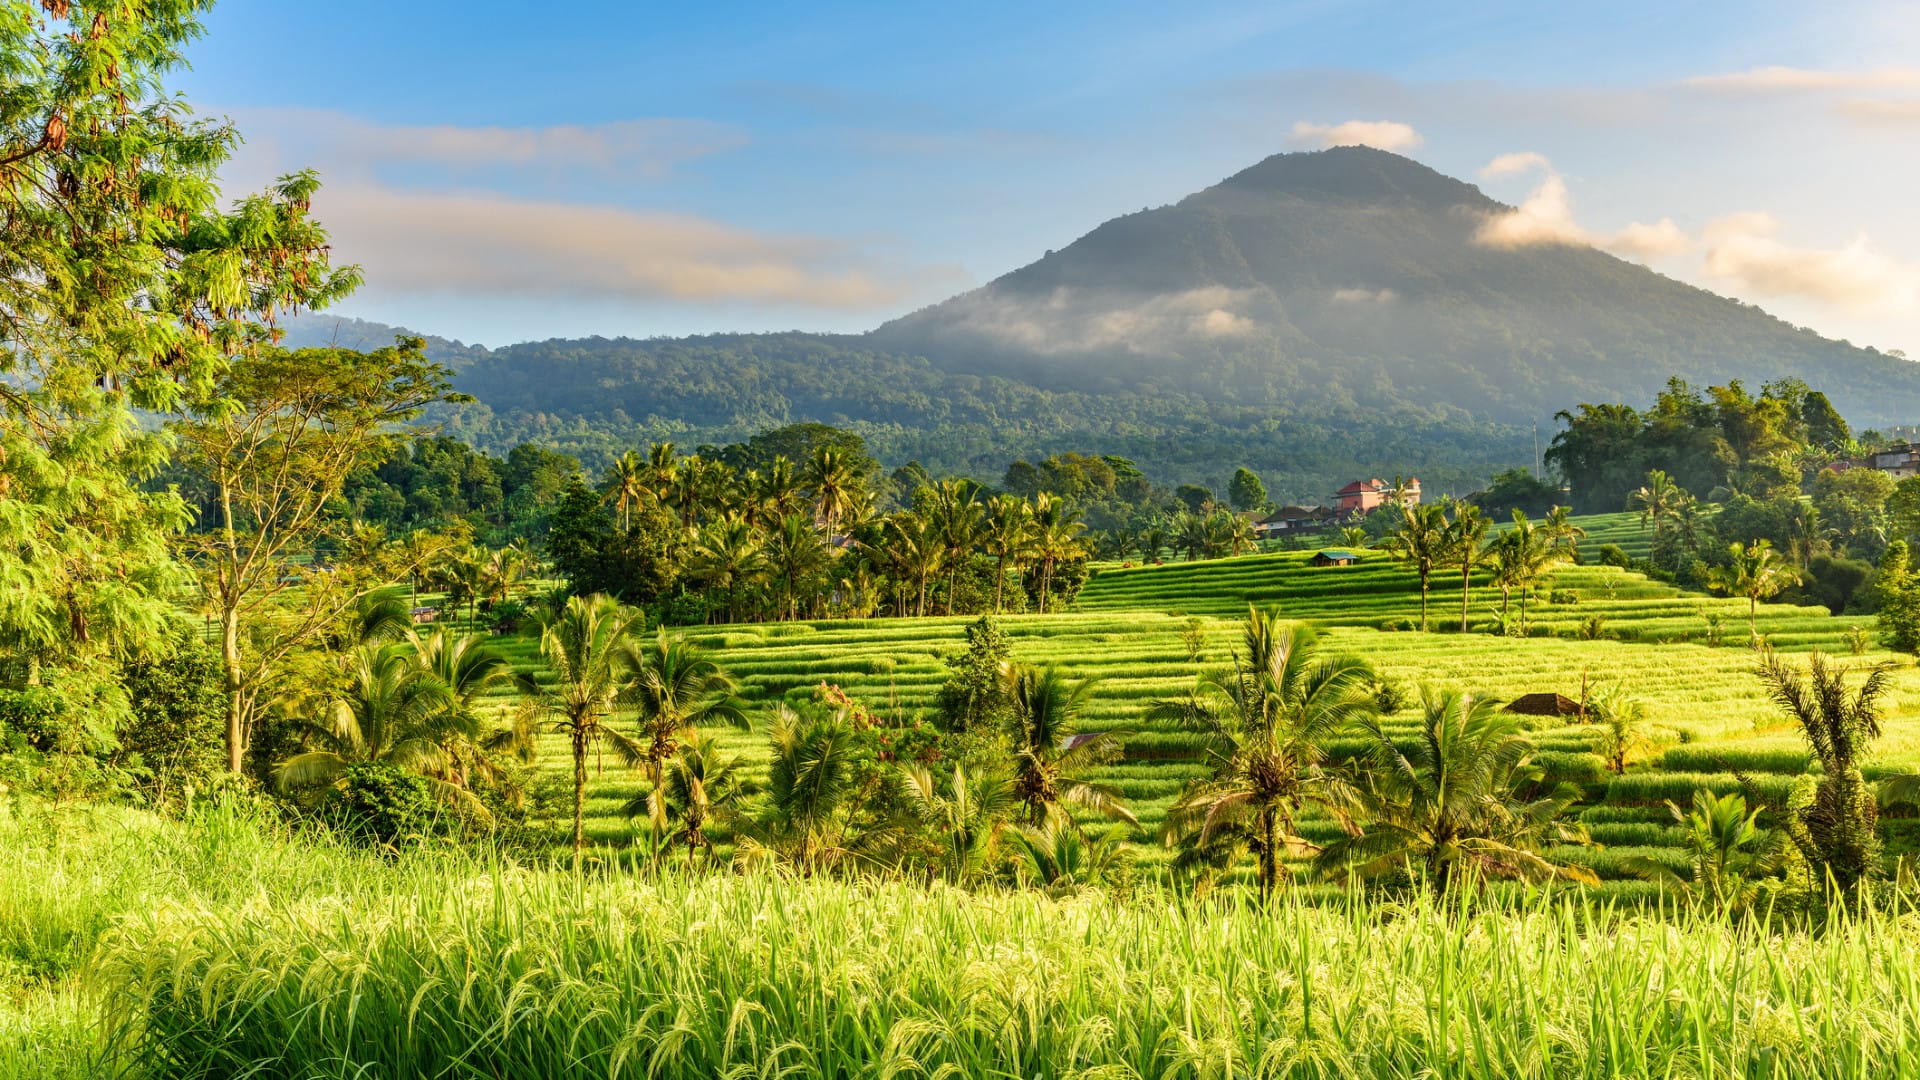 Image of a mountain and green grass in Indonesia